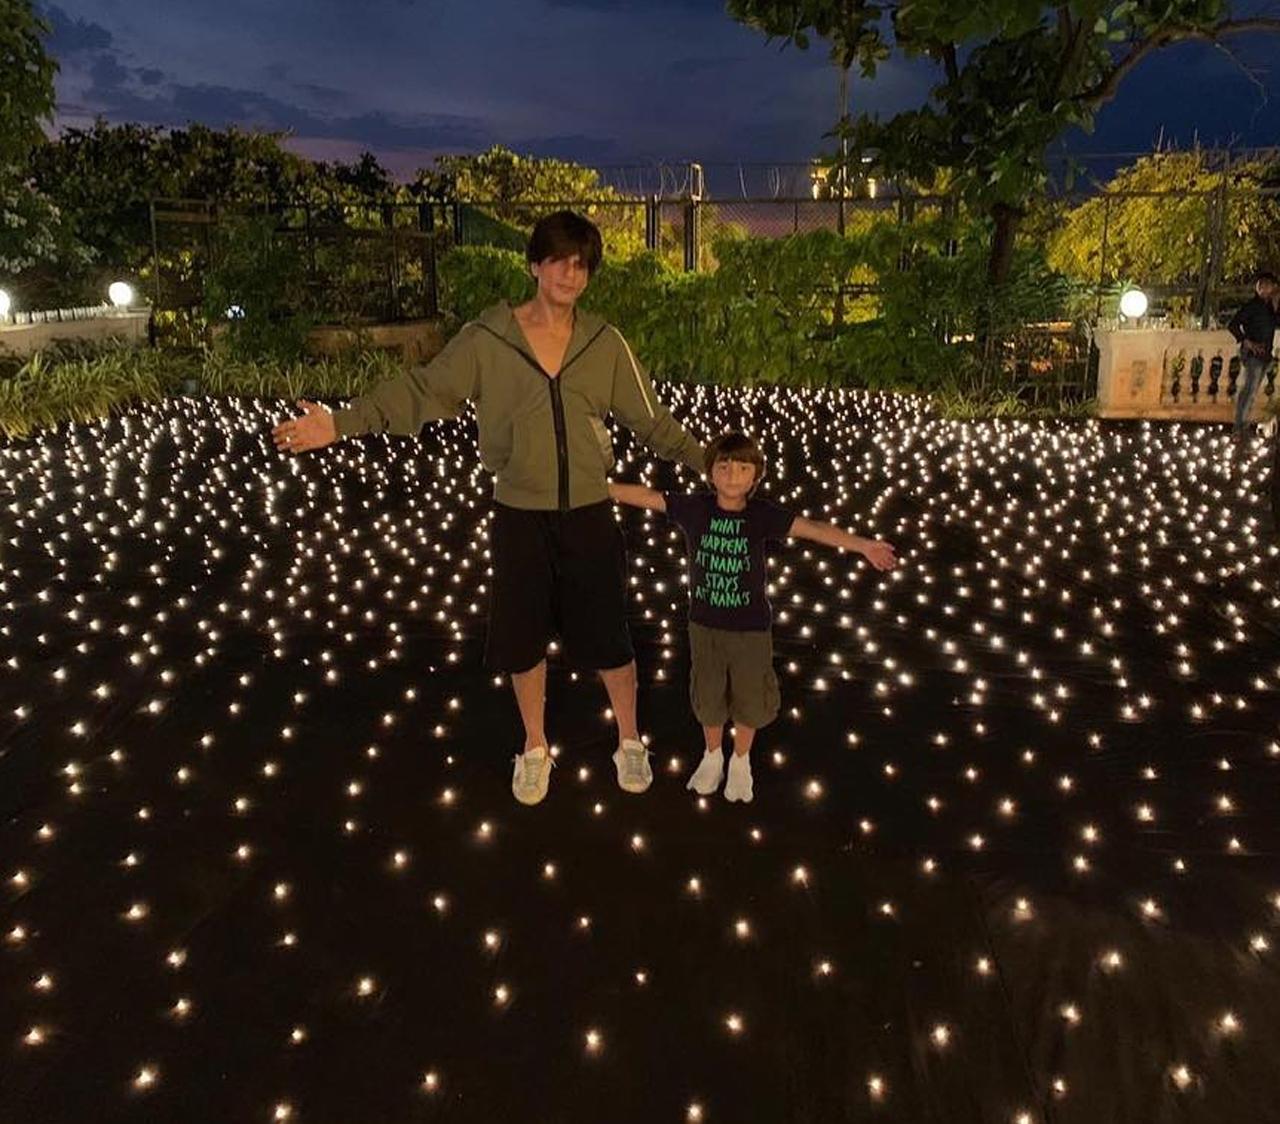 Shah Rukh Khan, AbRam Khan strike the former's iconic pose of spreading arms in this luminous click surrounded by lights that make this a stunning picture.